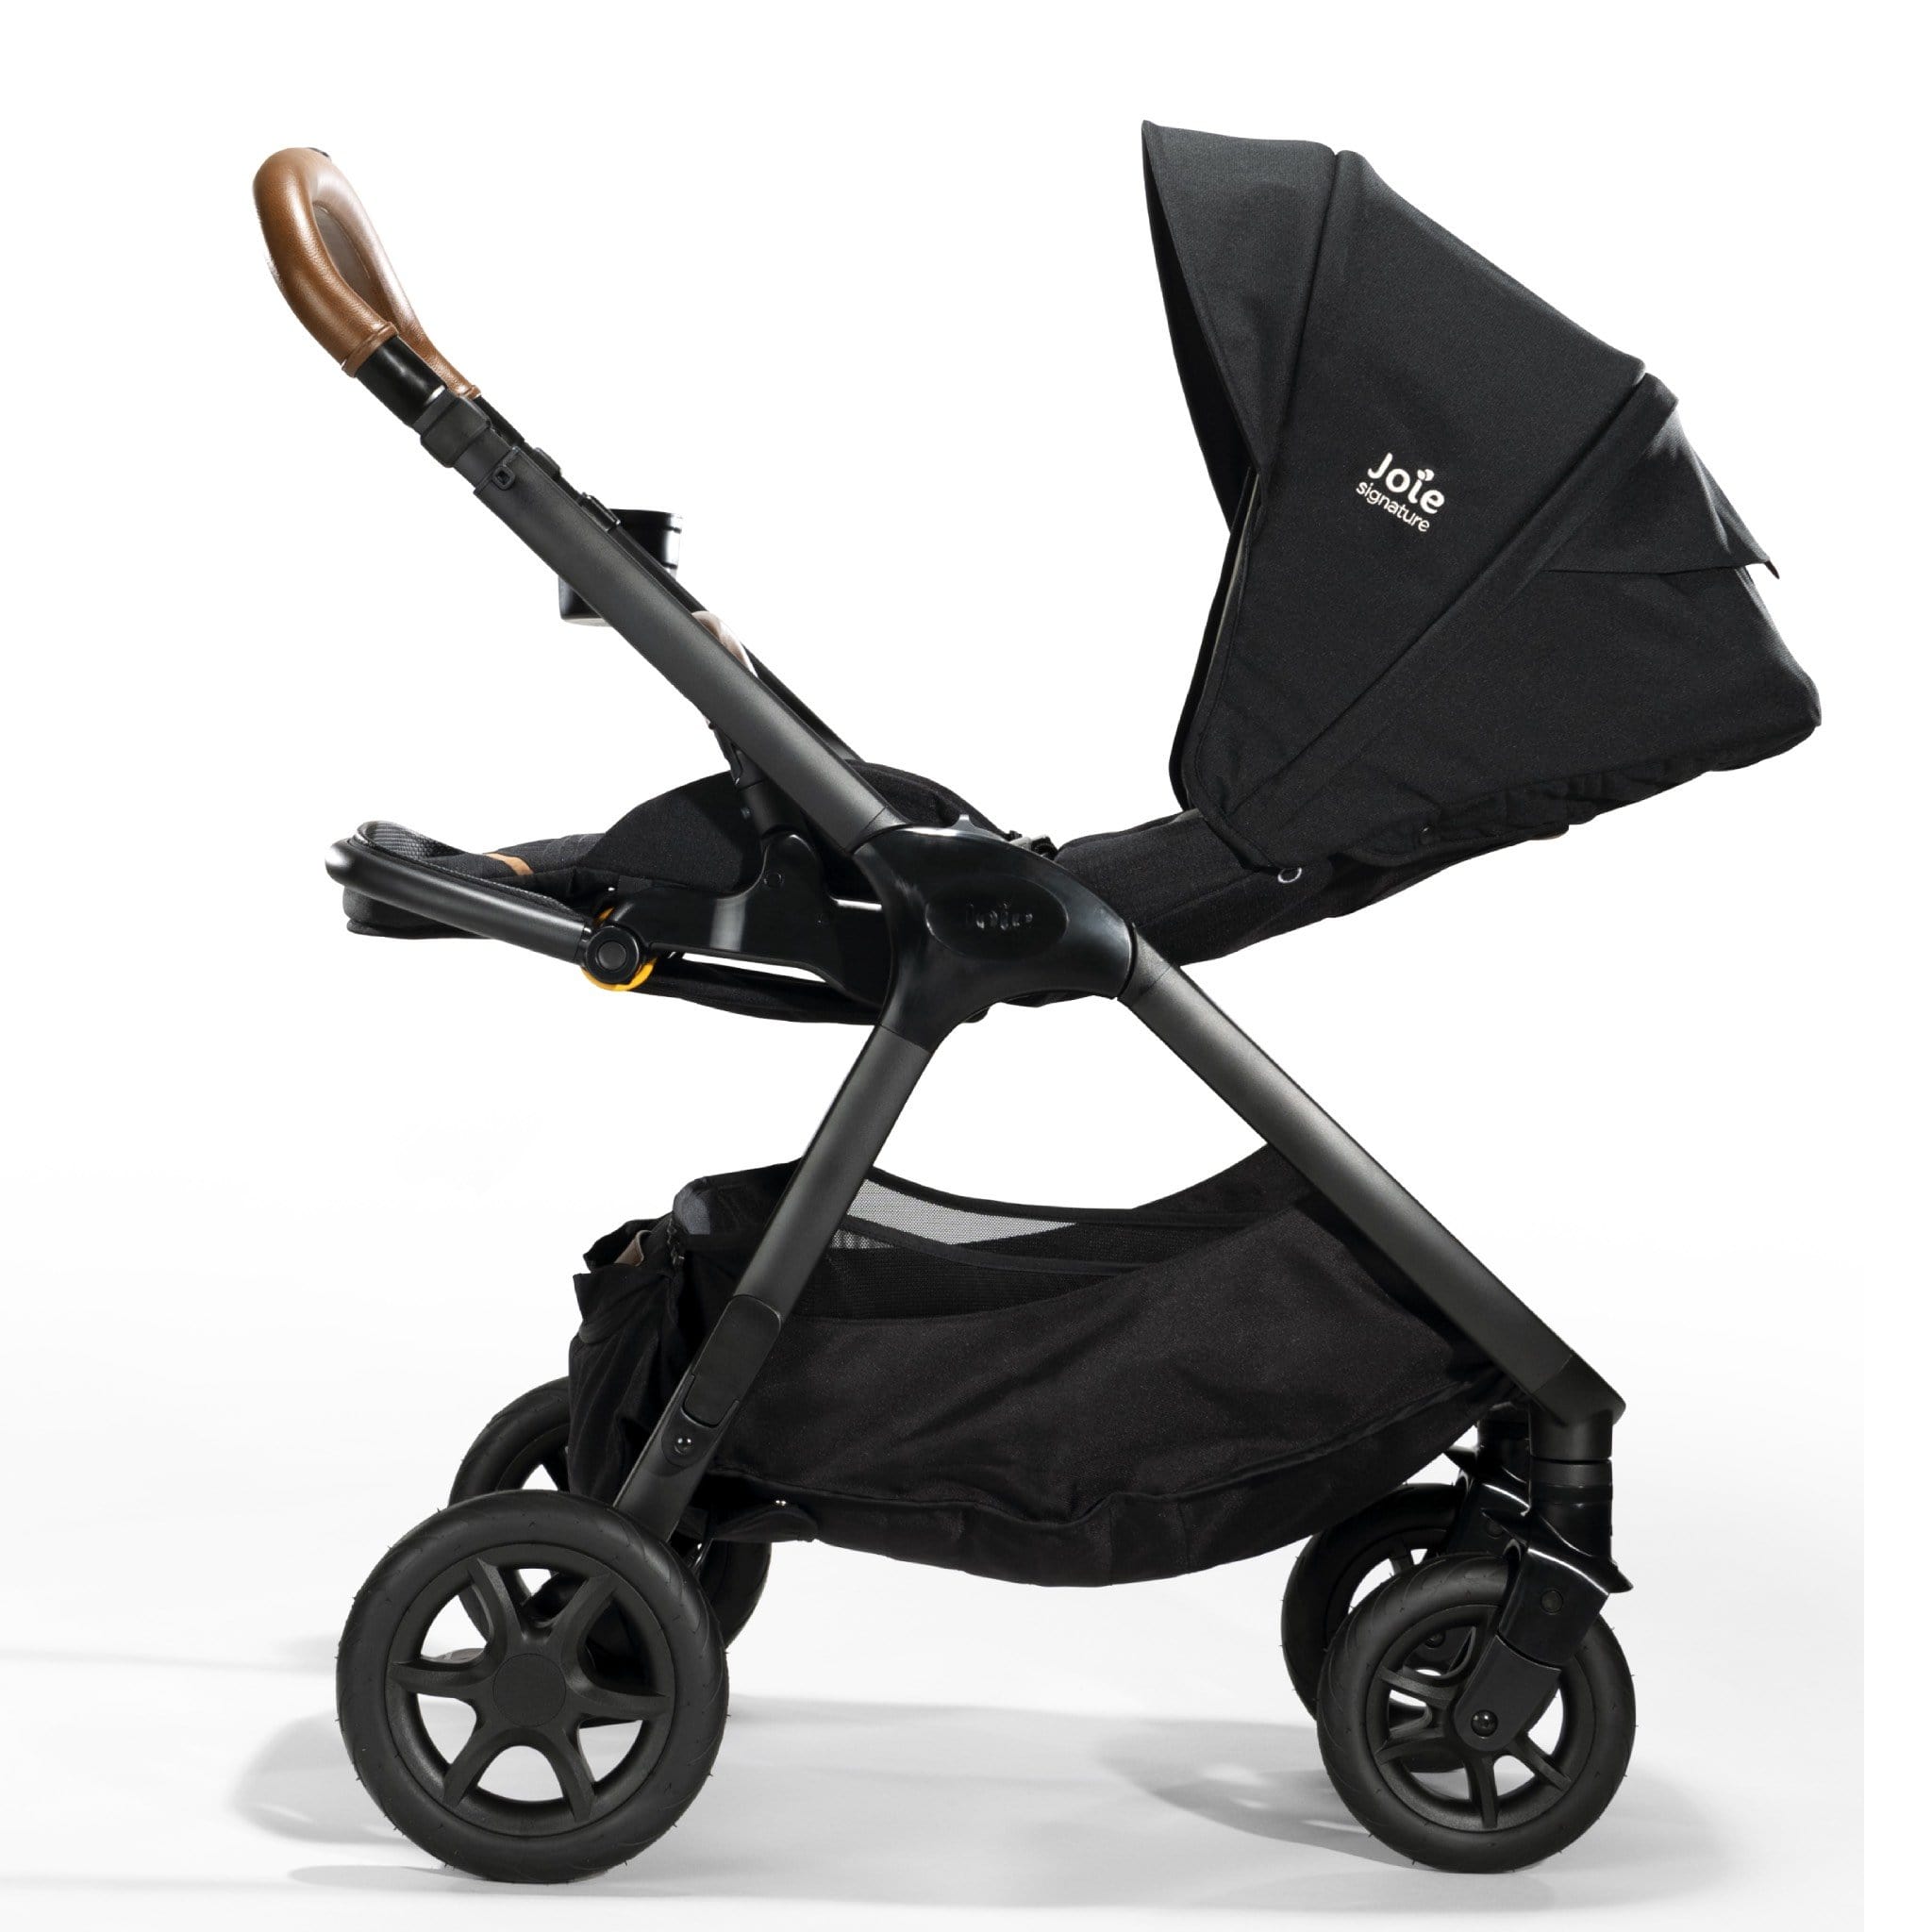 Joie Finiti 4in1 Signature Edition Pram Eclipse Baby Prams S1606AAECL000 5056080611150